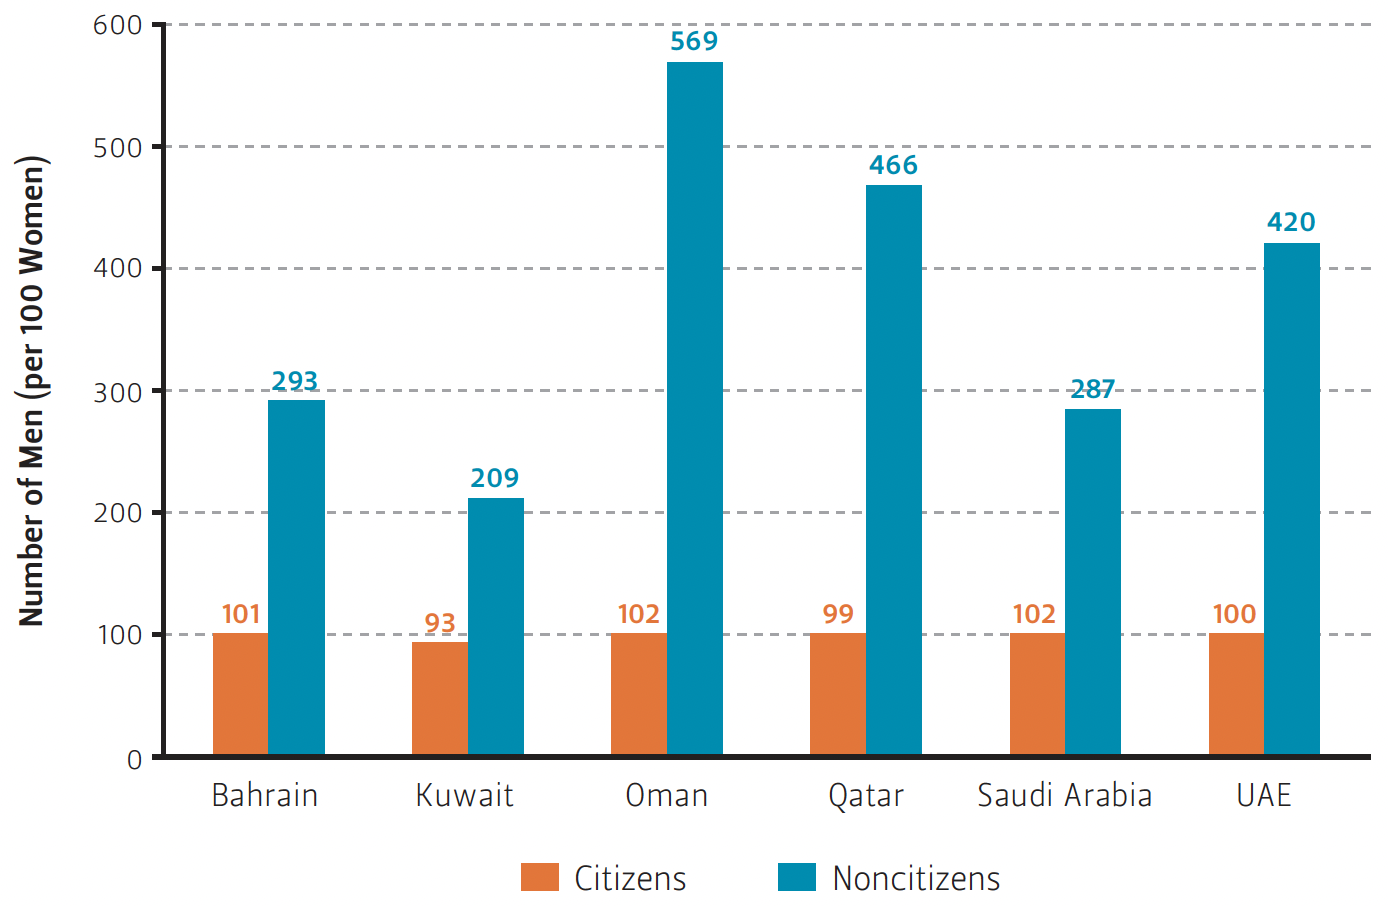 This graph compares the number of men per 100 women in the GCC countries.